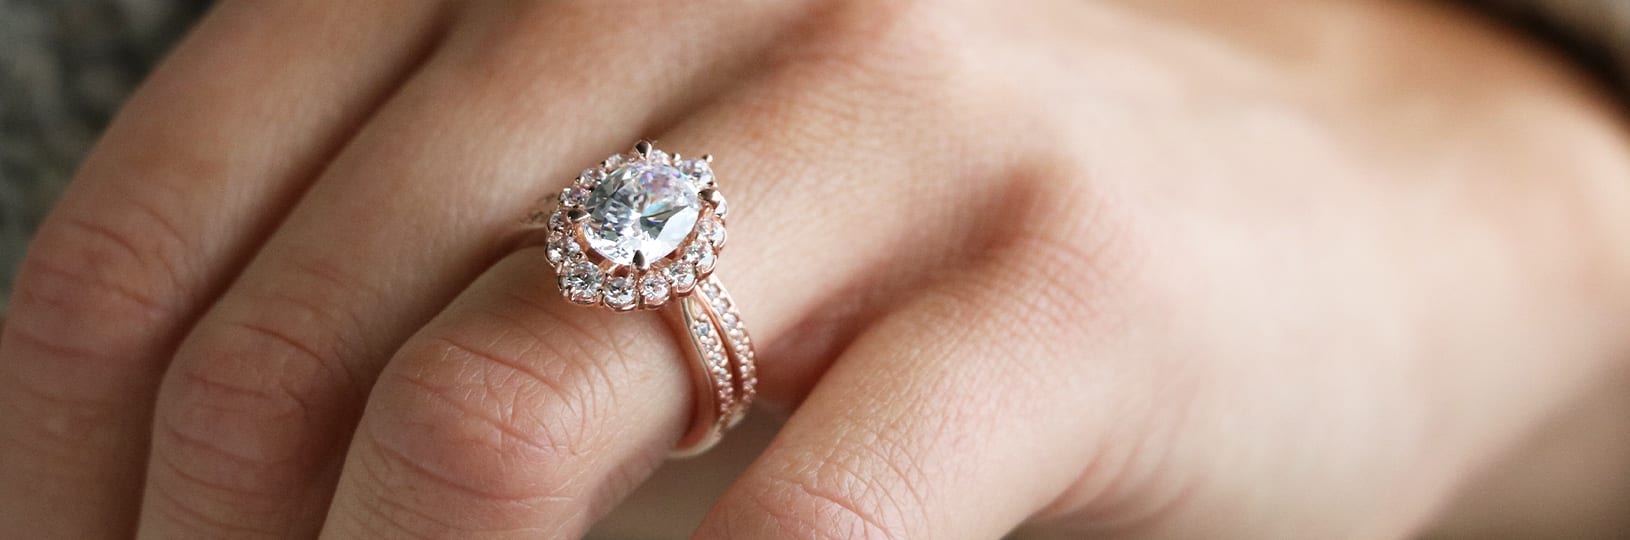 A halo engagement ring